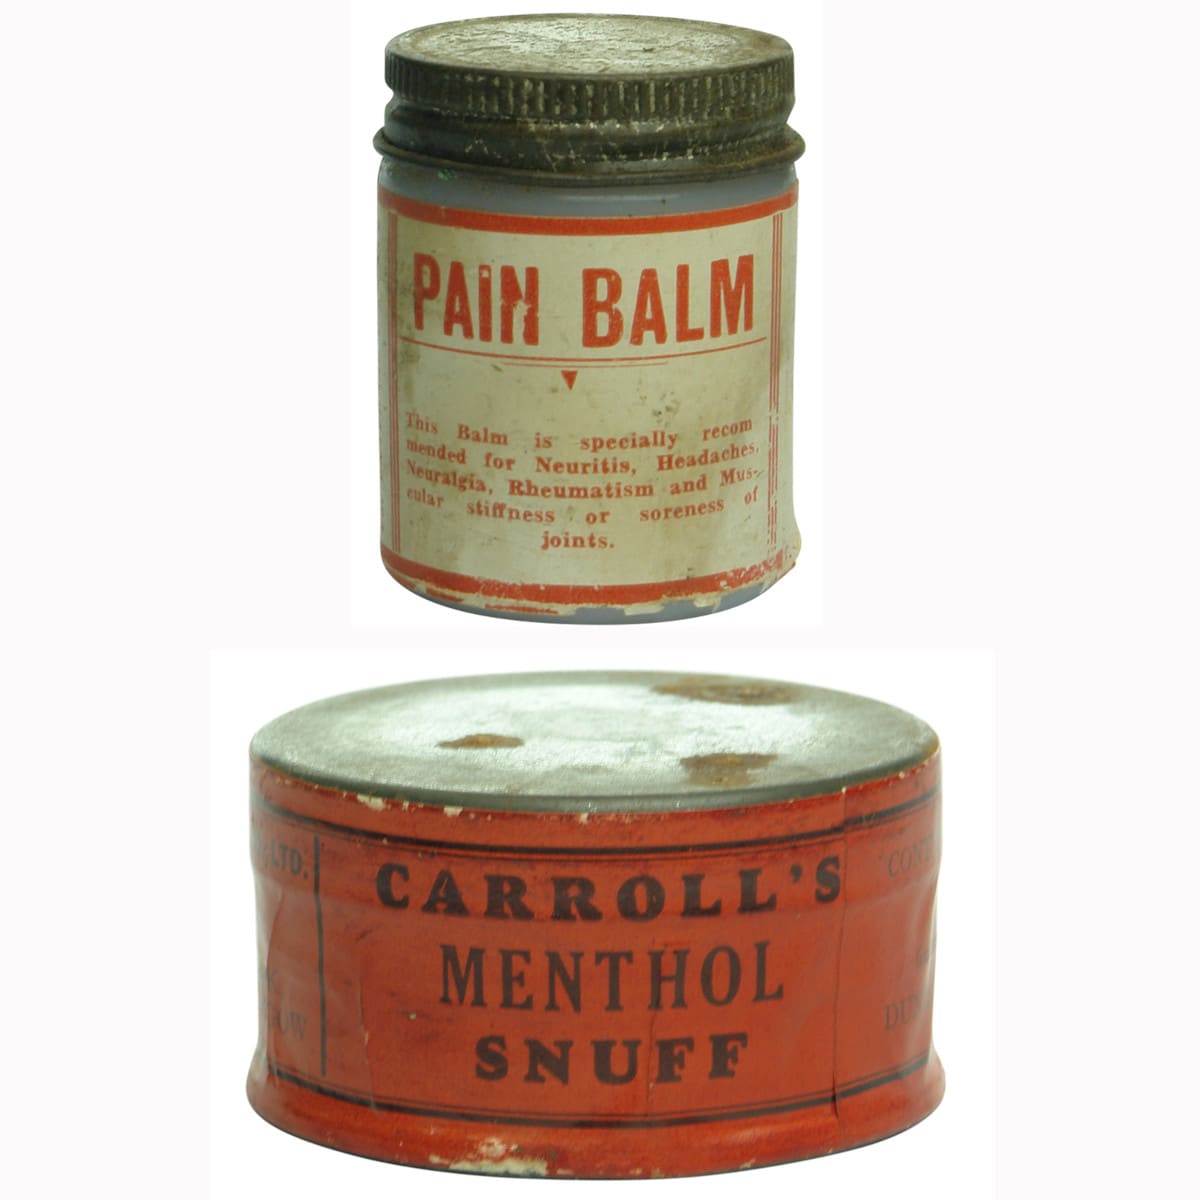 Pair of full ointment jars.